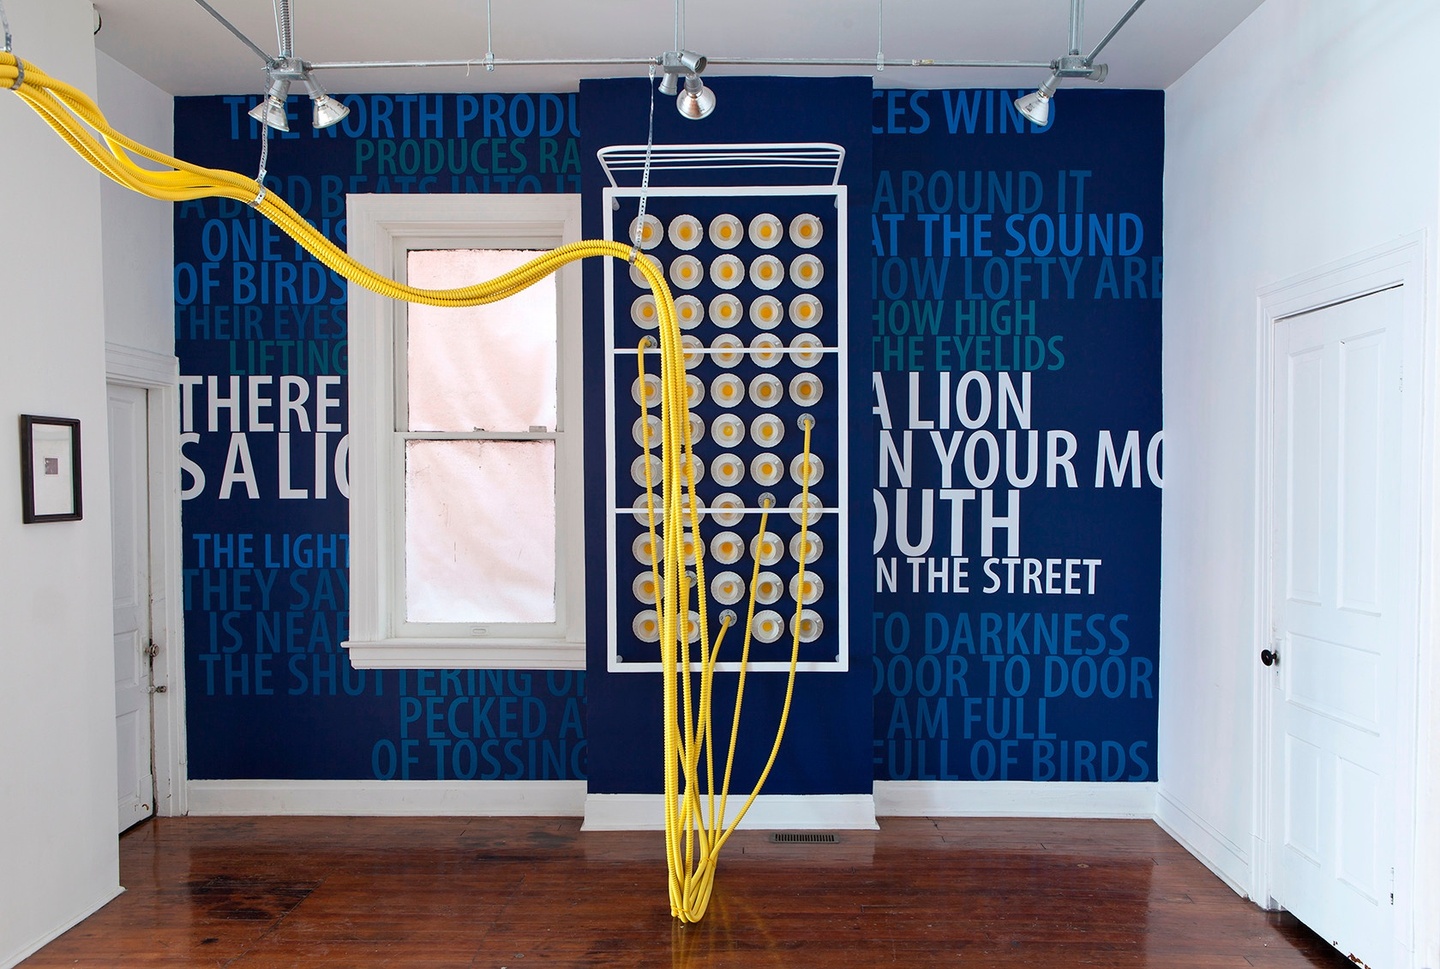 Installation view of a gallery space: yellow tubing hangs from the ceiling, suspended by white wires/cords, and connect to sockets where they plug into the wall. The walls are a deep ultramarine blue, with text of various colors (different shades of blue, teal, and white) tiled across. The walls to the left and right are white, and the floors are wooden.